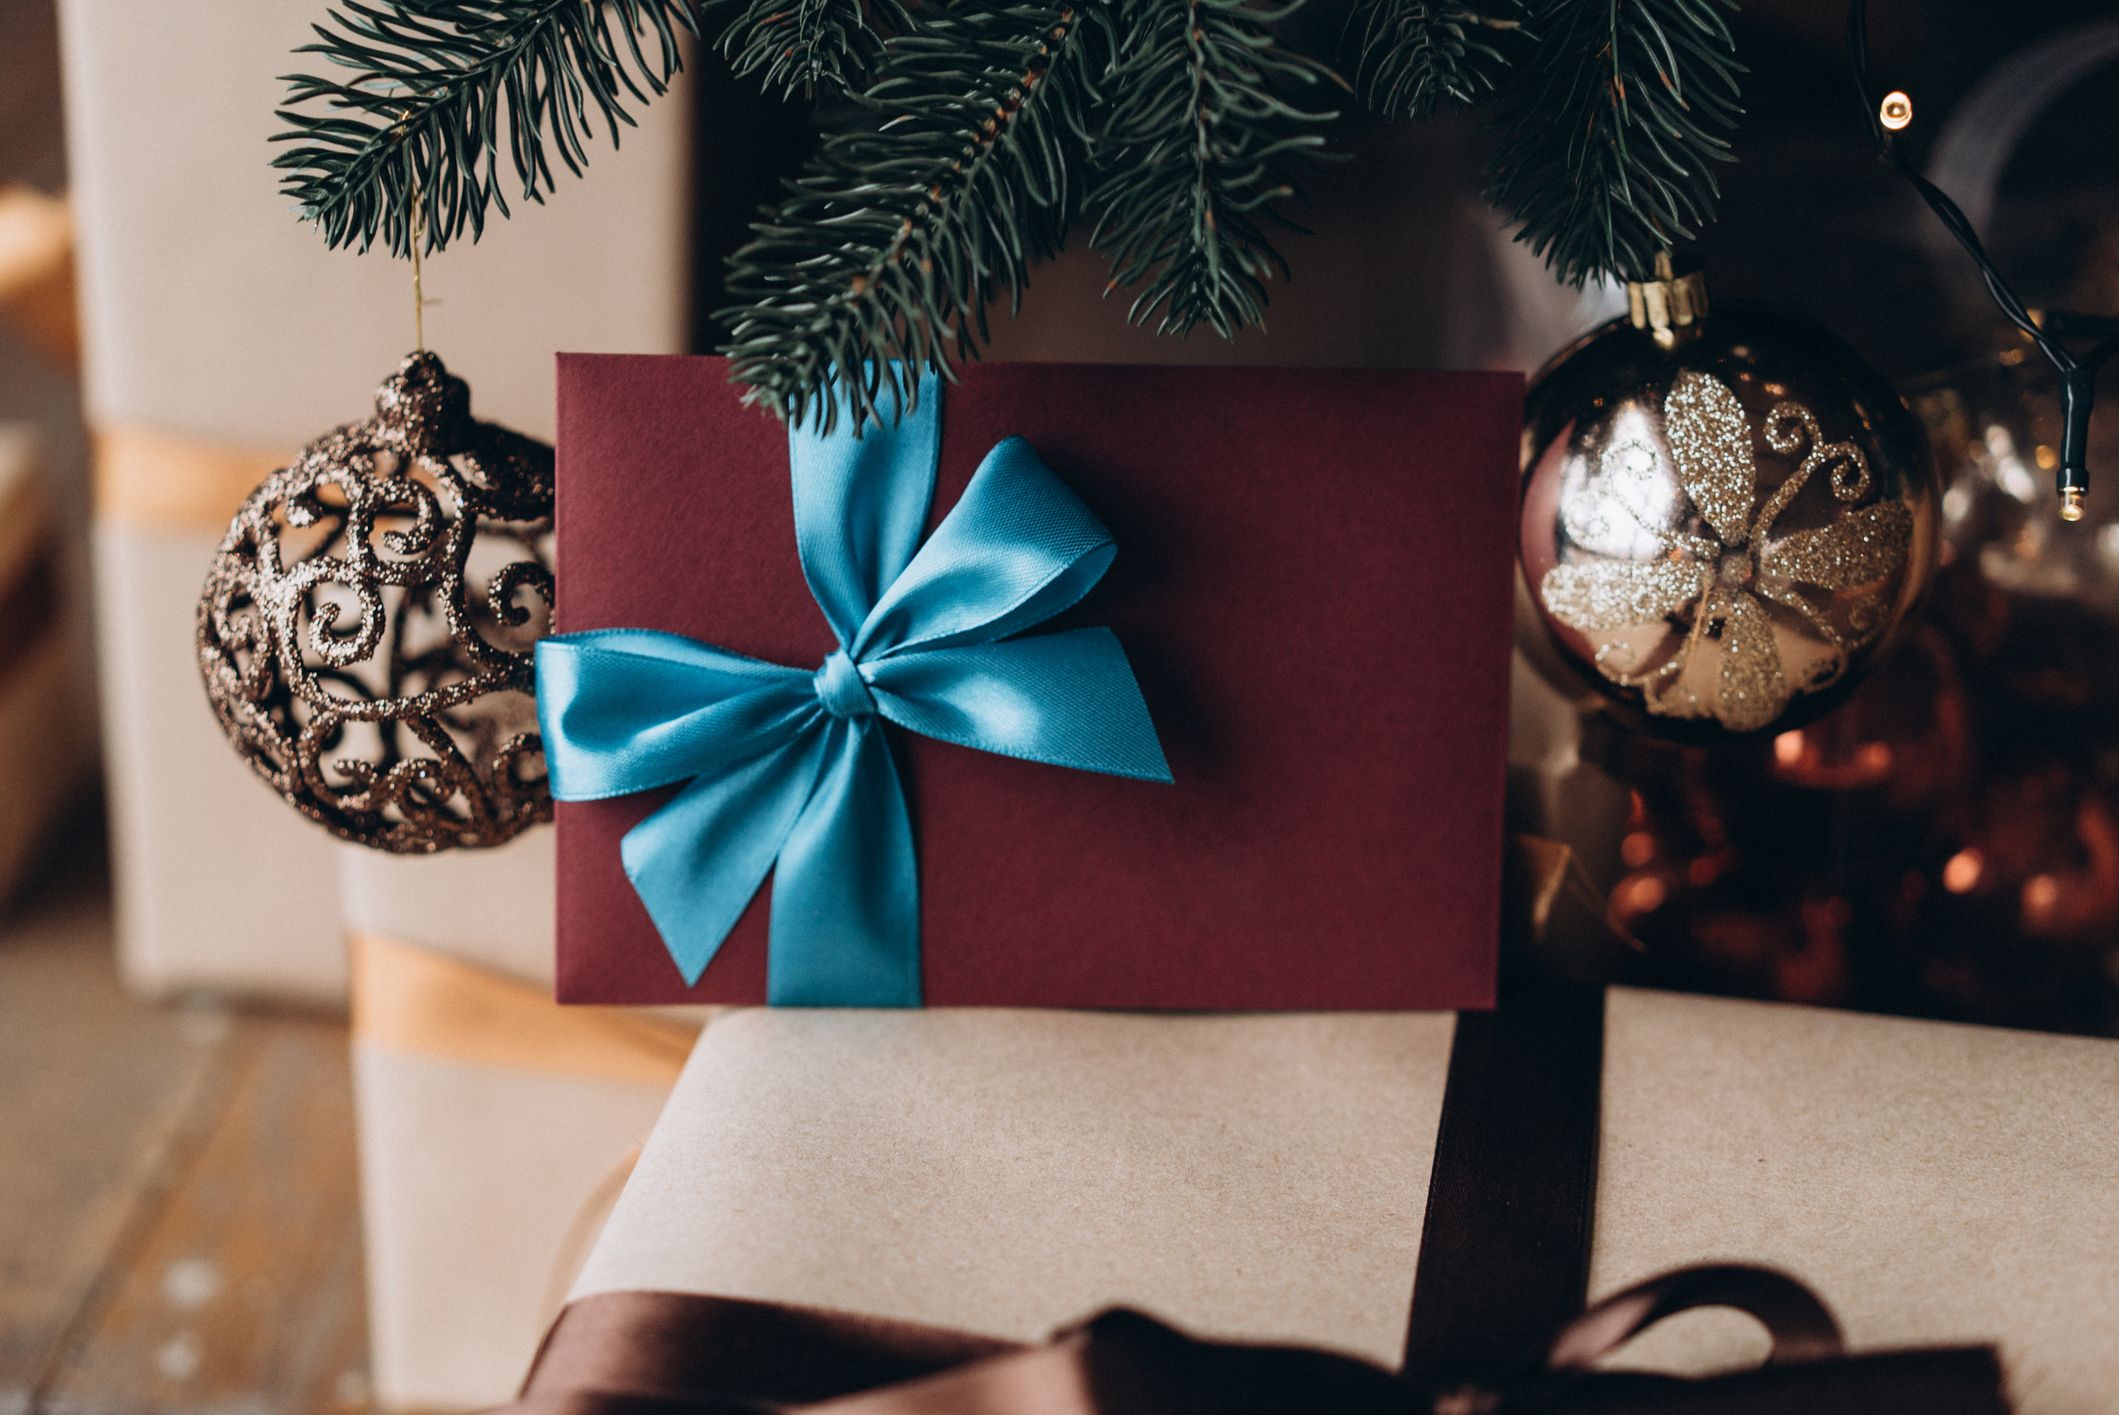 6 Useful Christmas Gifts for the College Student on Your List